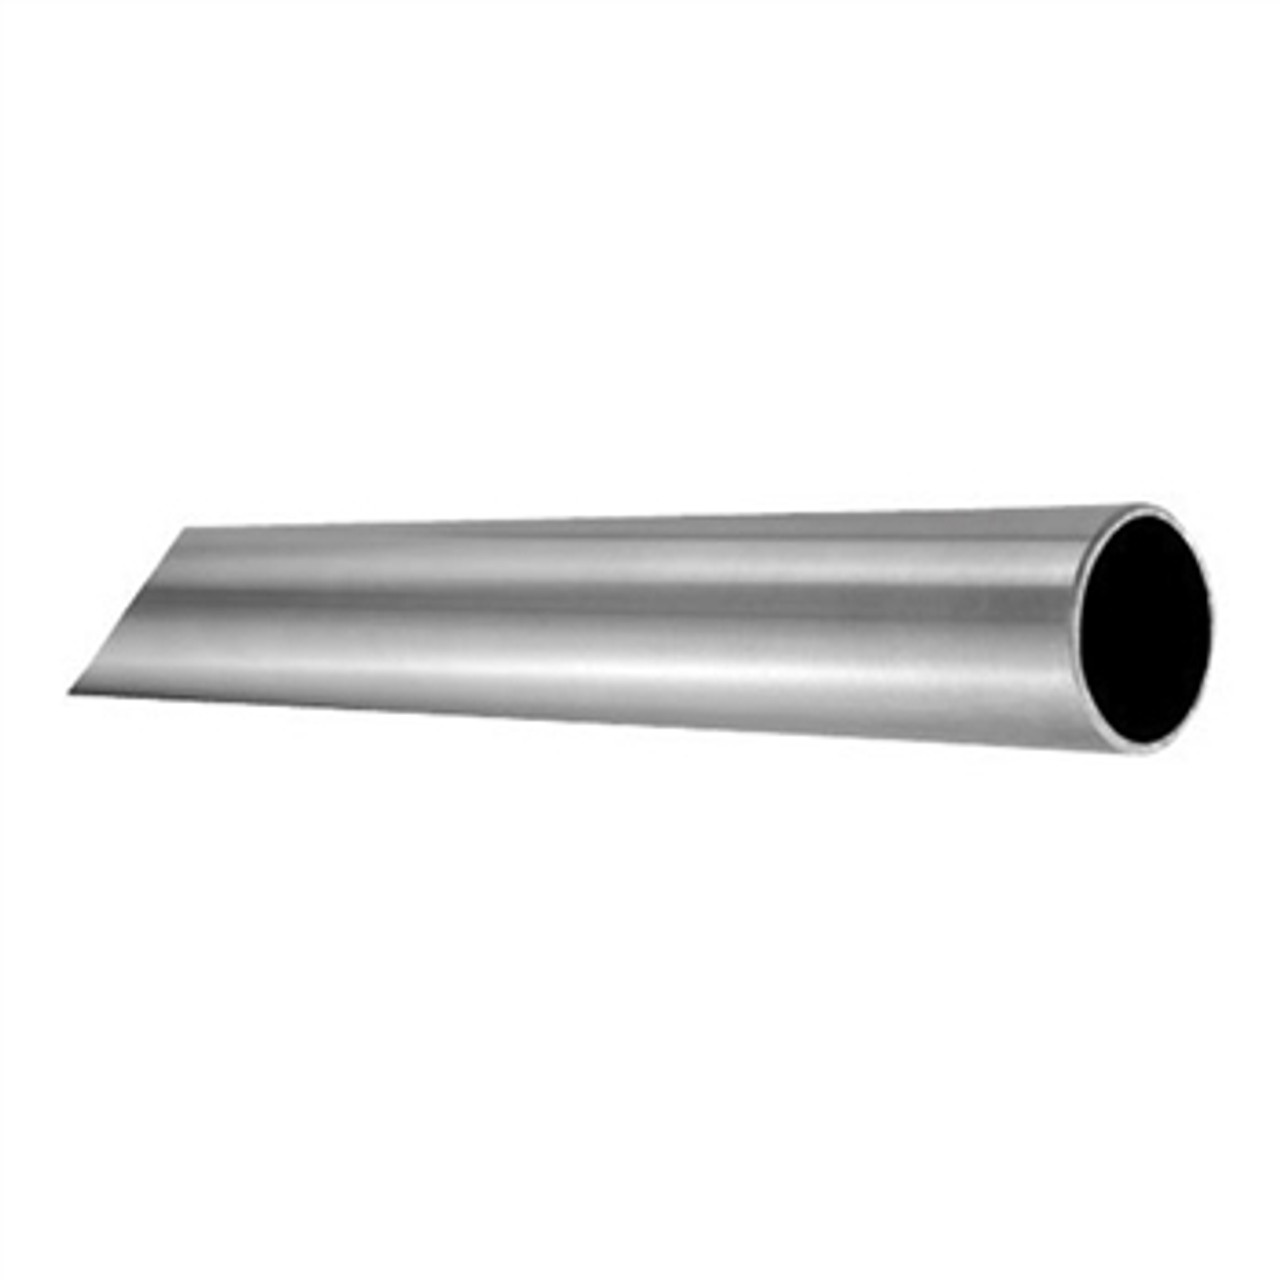 E0014 Stainless Steel Tube, 2", 9-foot or 19-foot